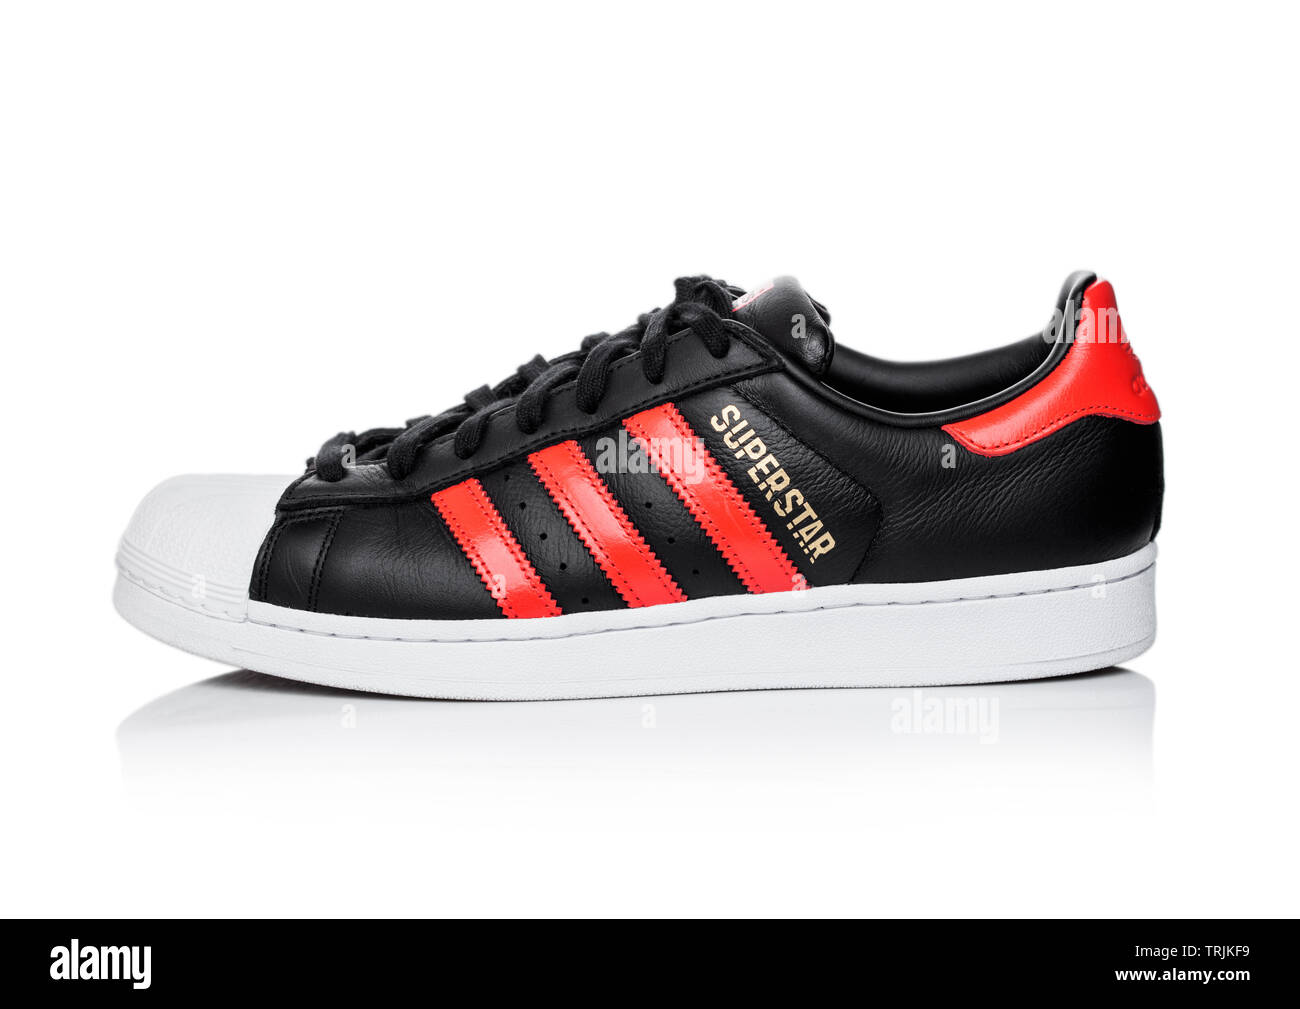 Dardos Humedal recepción LONDON, UK - JUNE 05, 2019: Adidas Originals Superstar black shoe with red  stripes on white background Stock Photo - Alamy